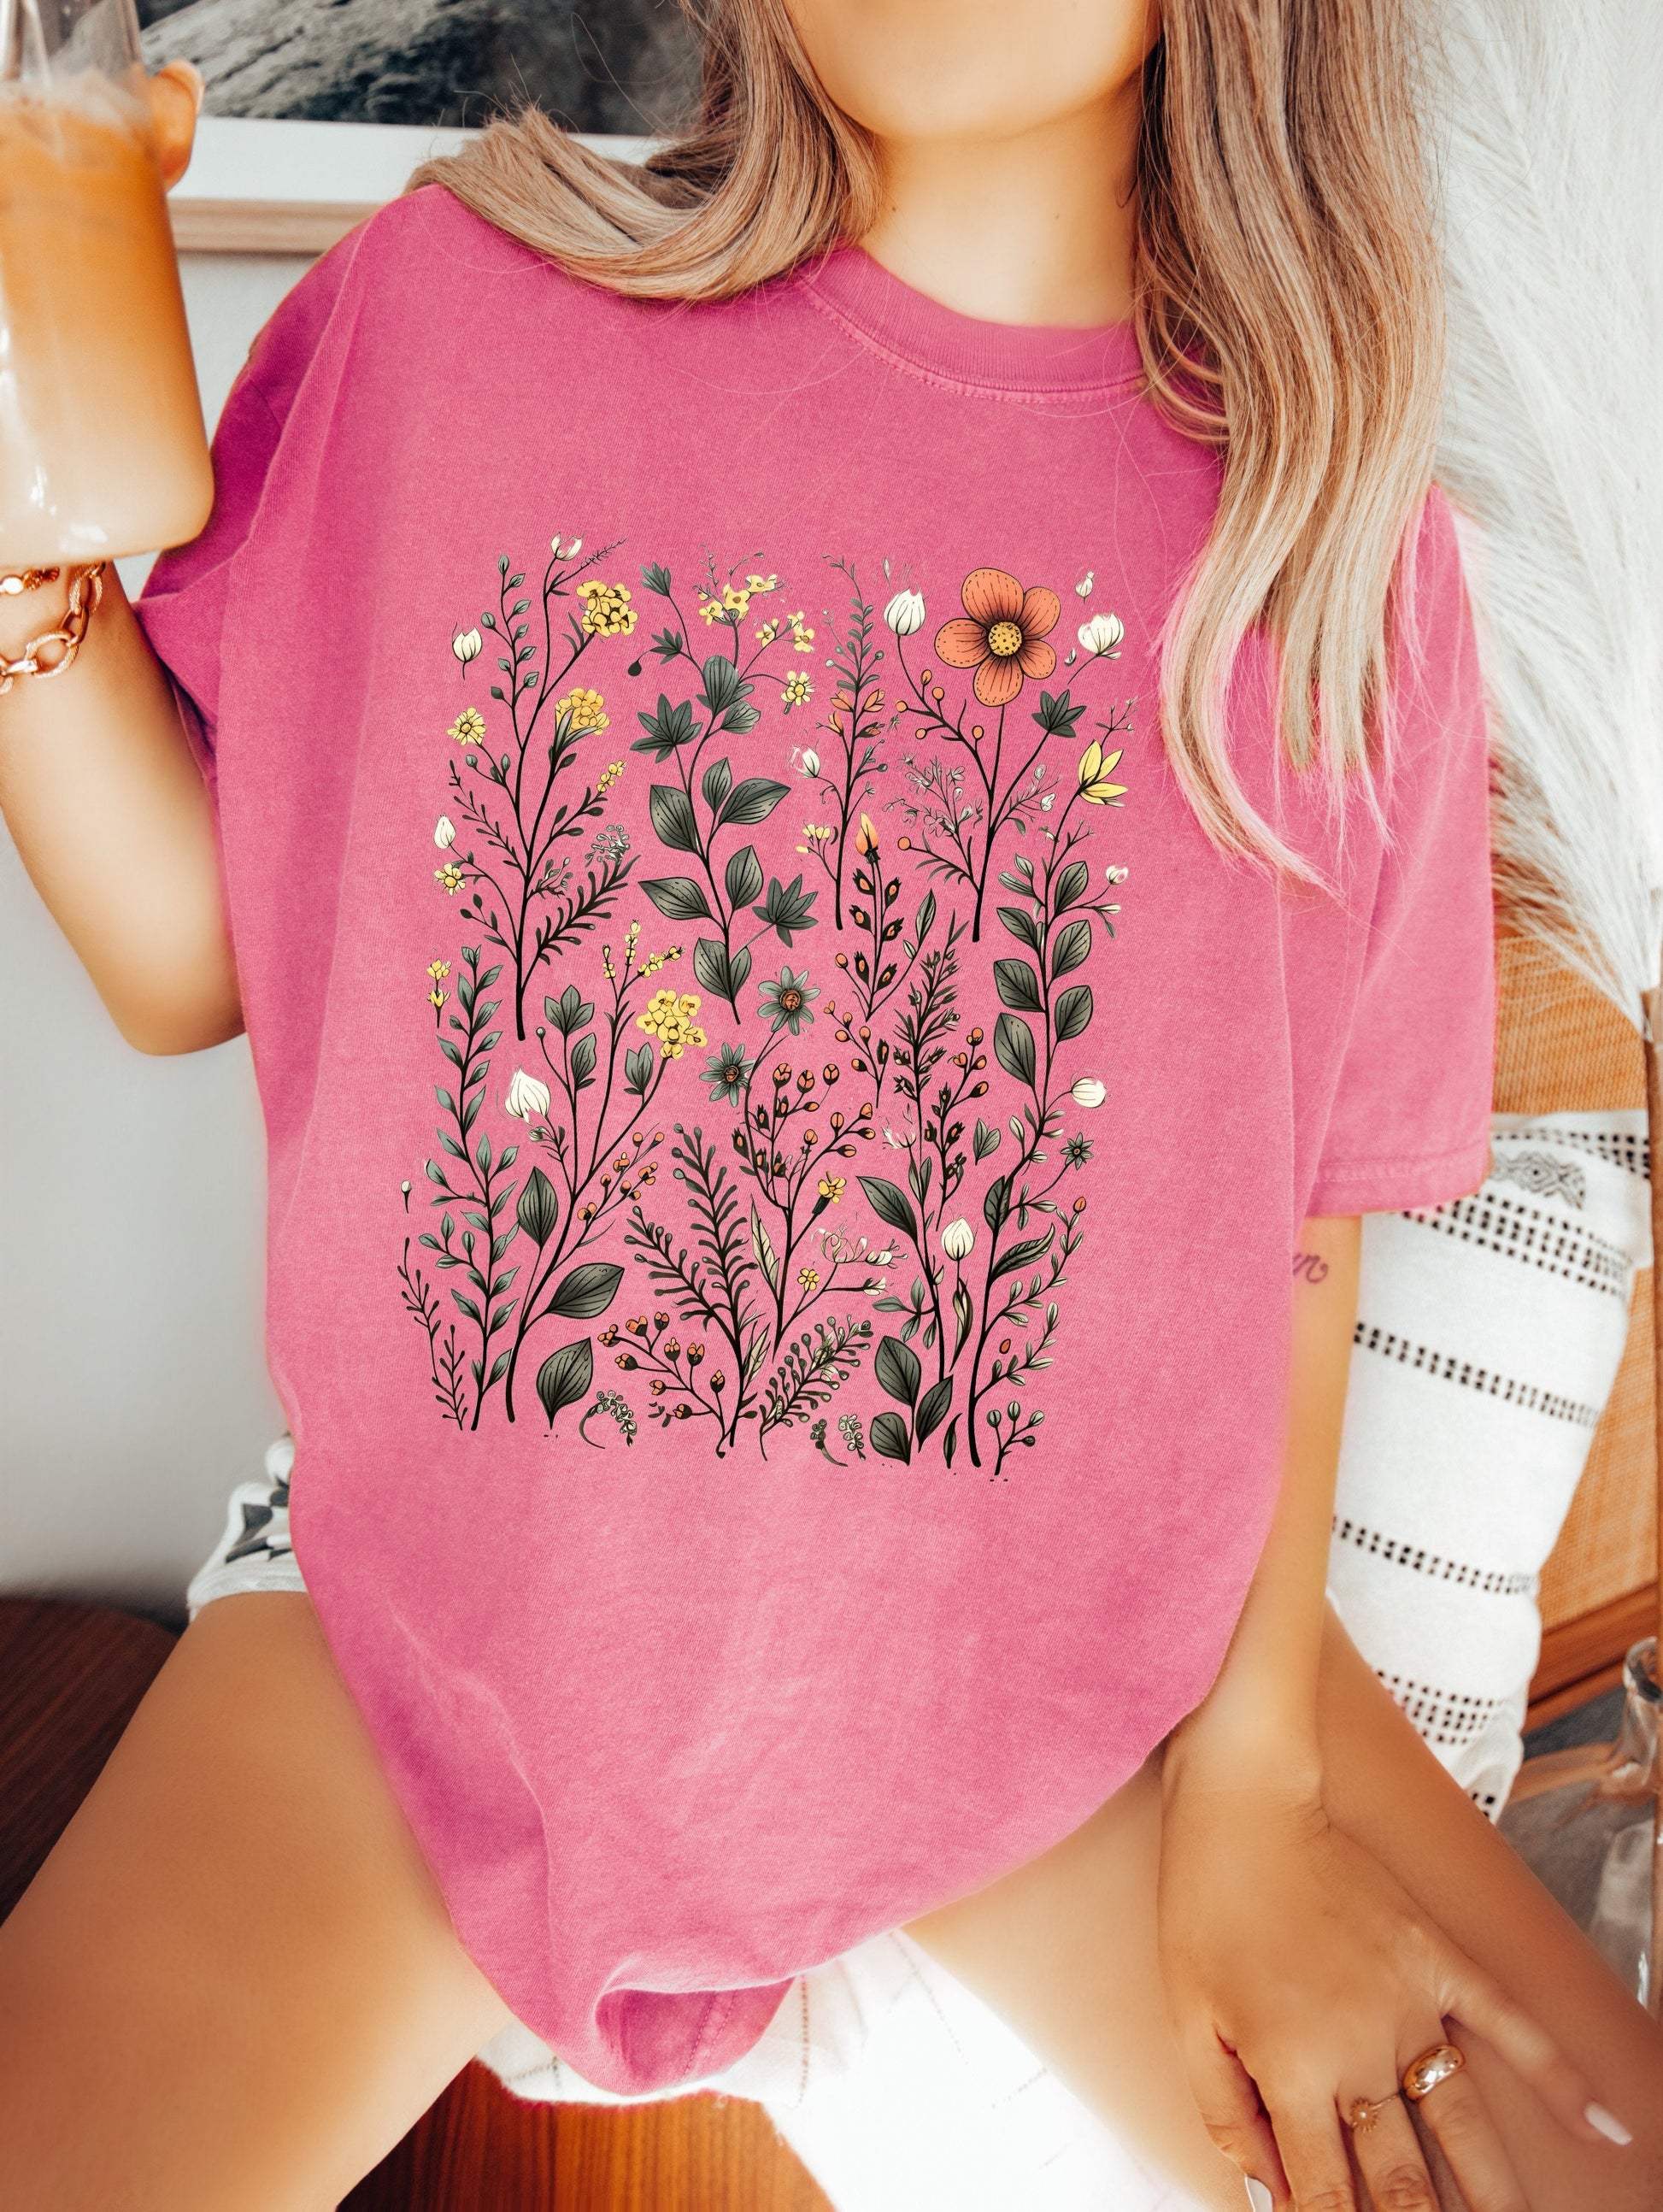 Witchy Floral Wildflowers Shirt Garden Lover Shirt Flower Lover Shirt Wild Flowers Shirt Floral Shirt